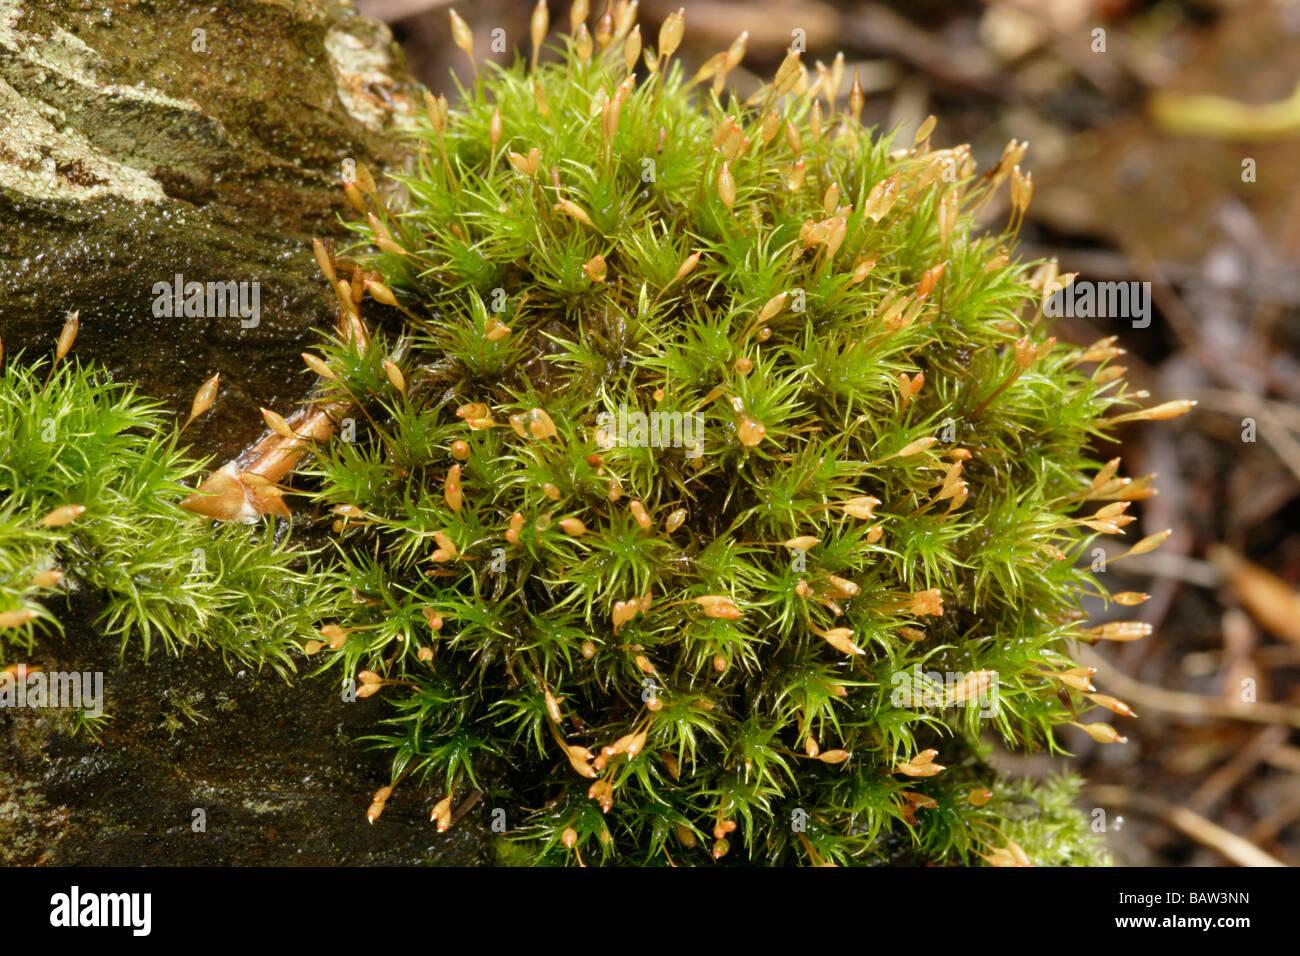 long-shanked-pincushion-moss-ptychomitrium-polyphyllum-with-capsules-BAW3NN.jpg